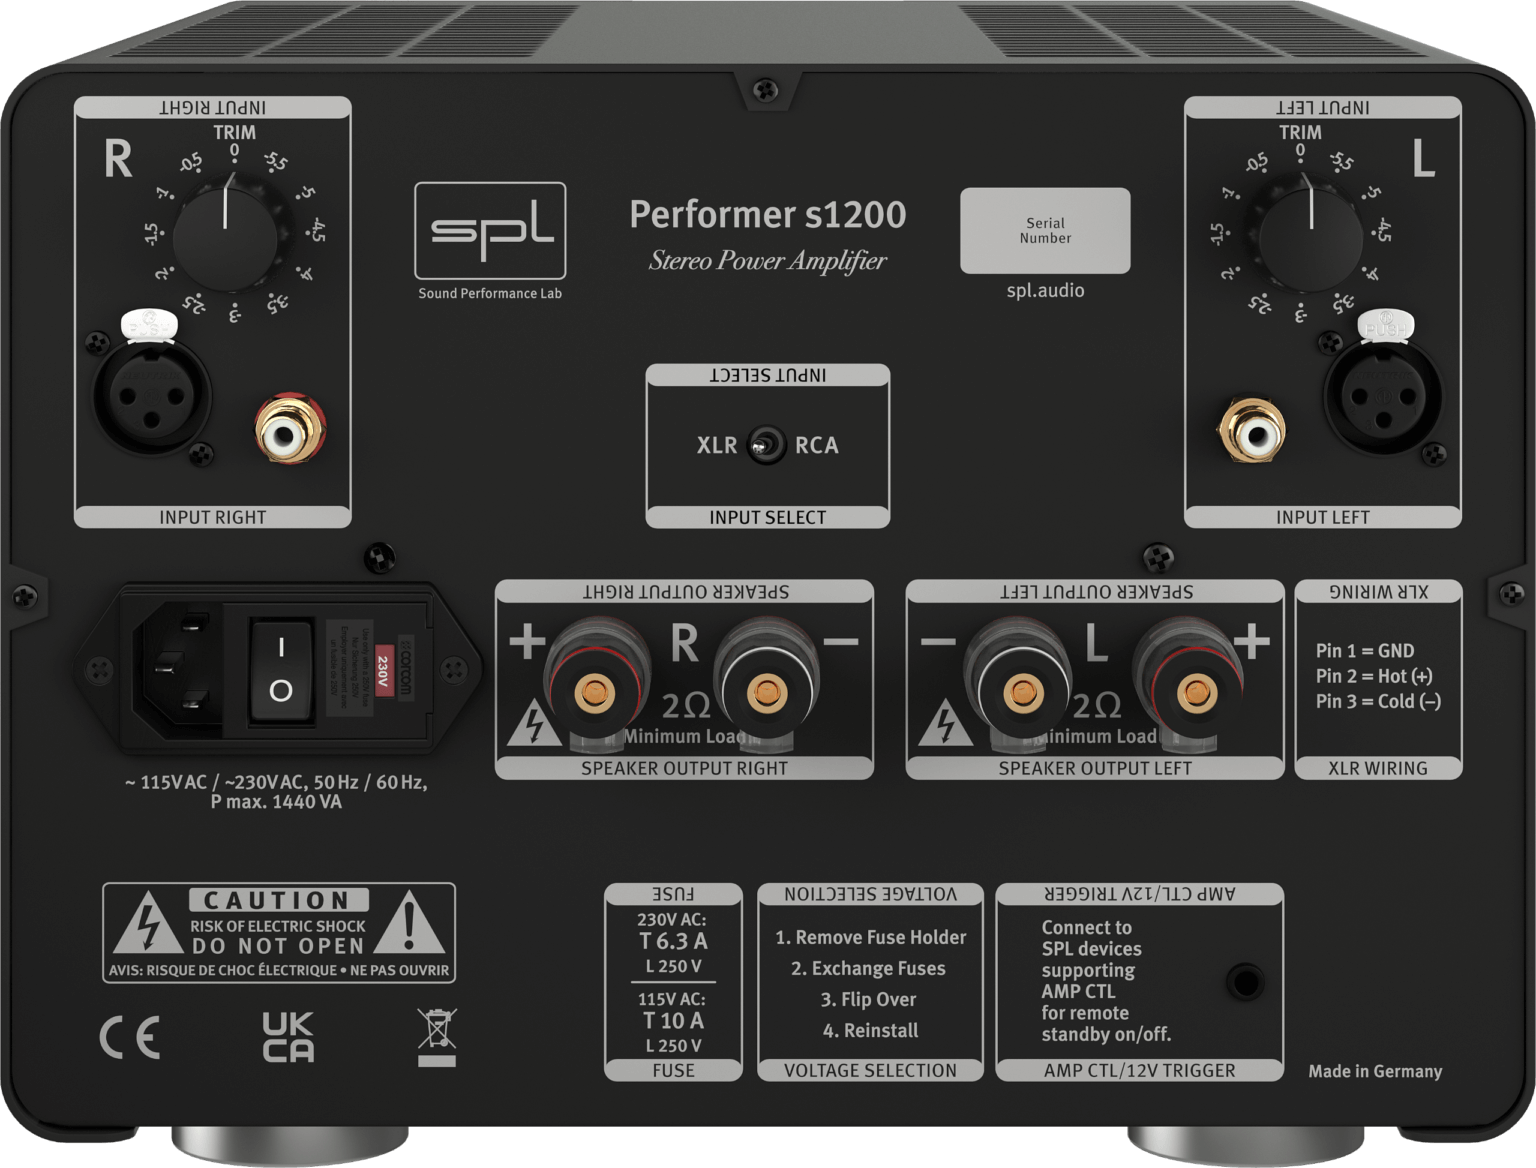 SPL Performer s1200 - The Powerful Stereo Amplifier